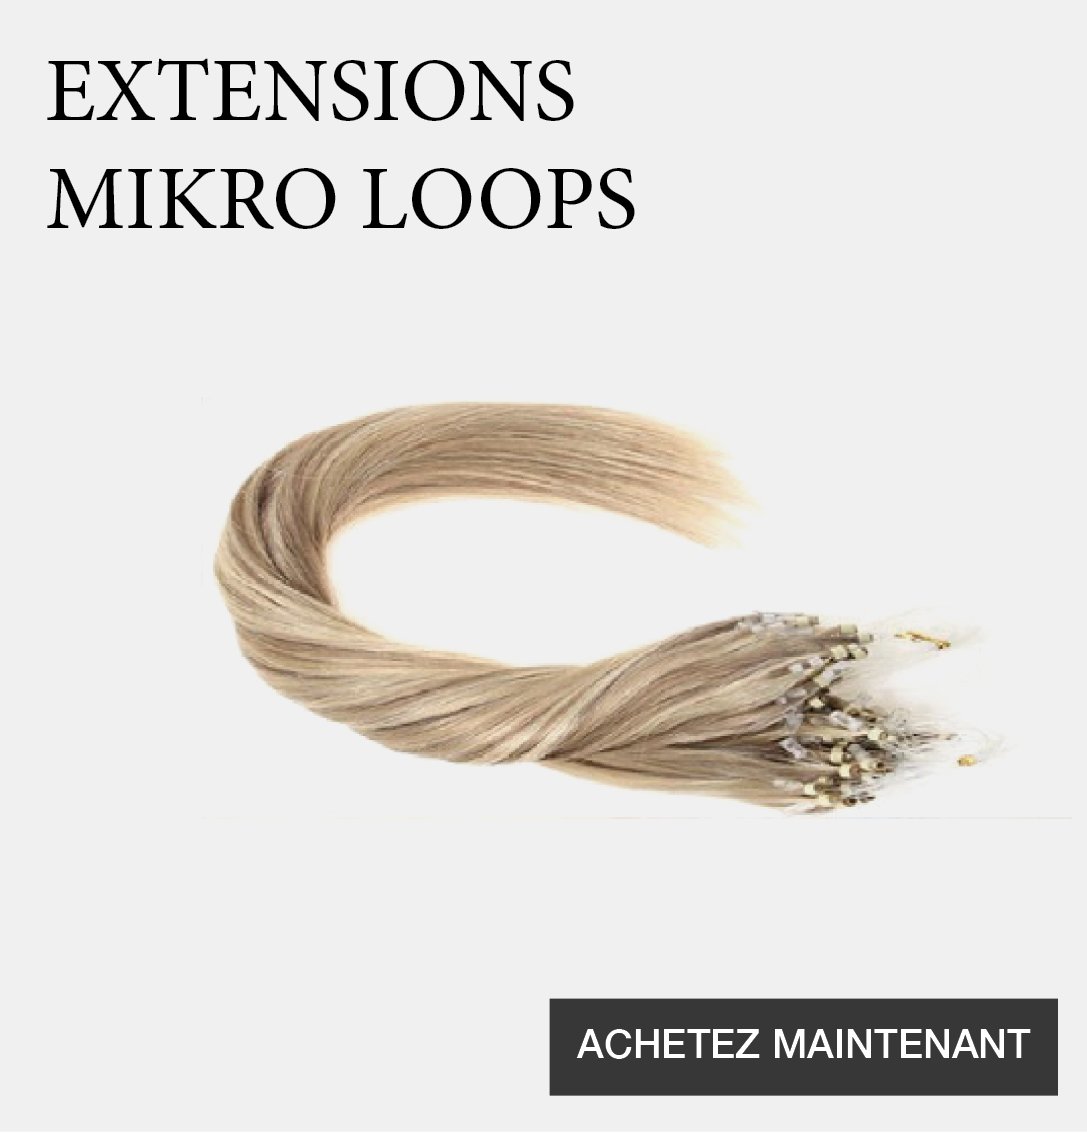 Extension mikro loops